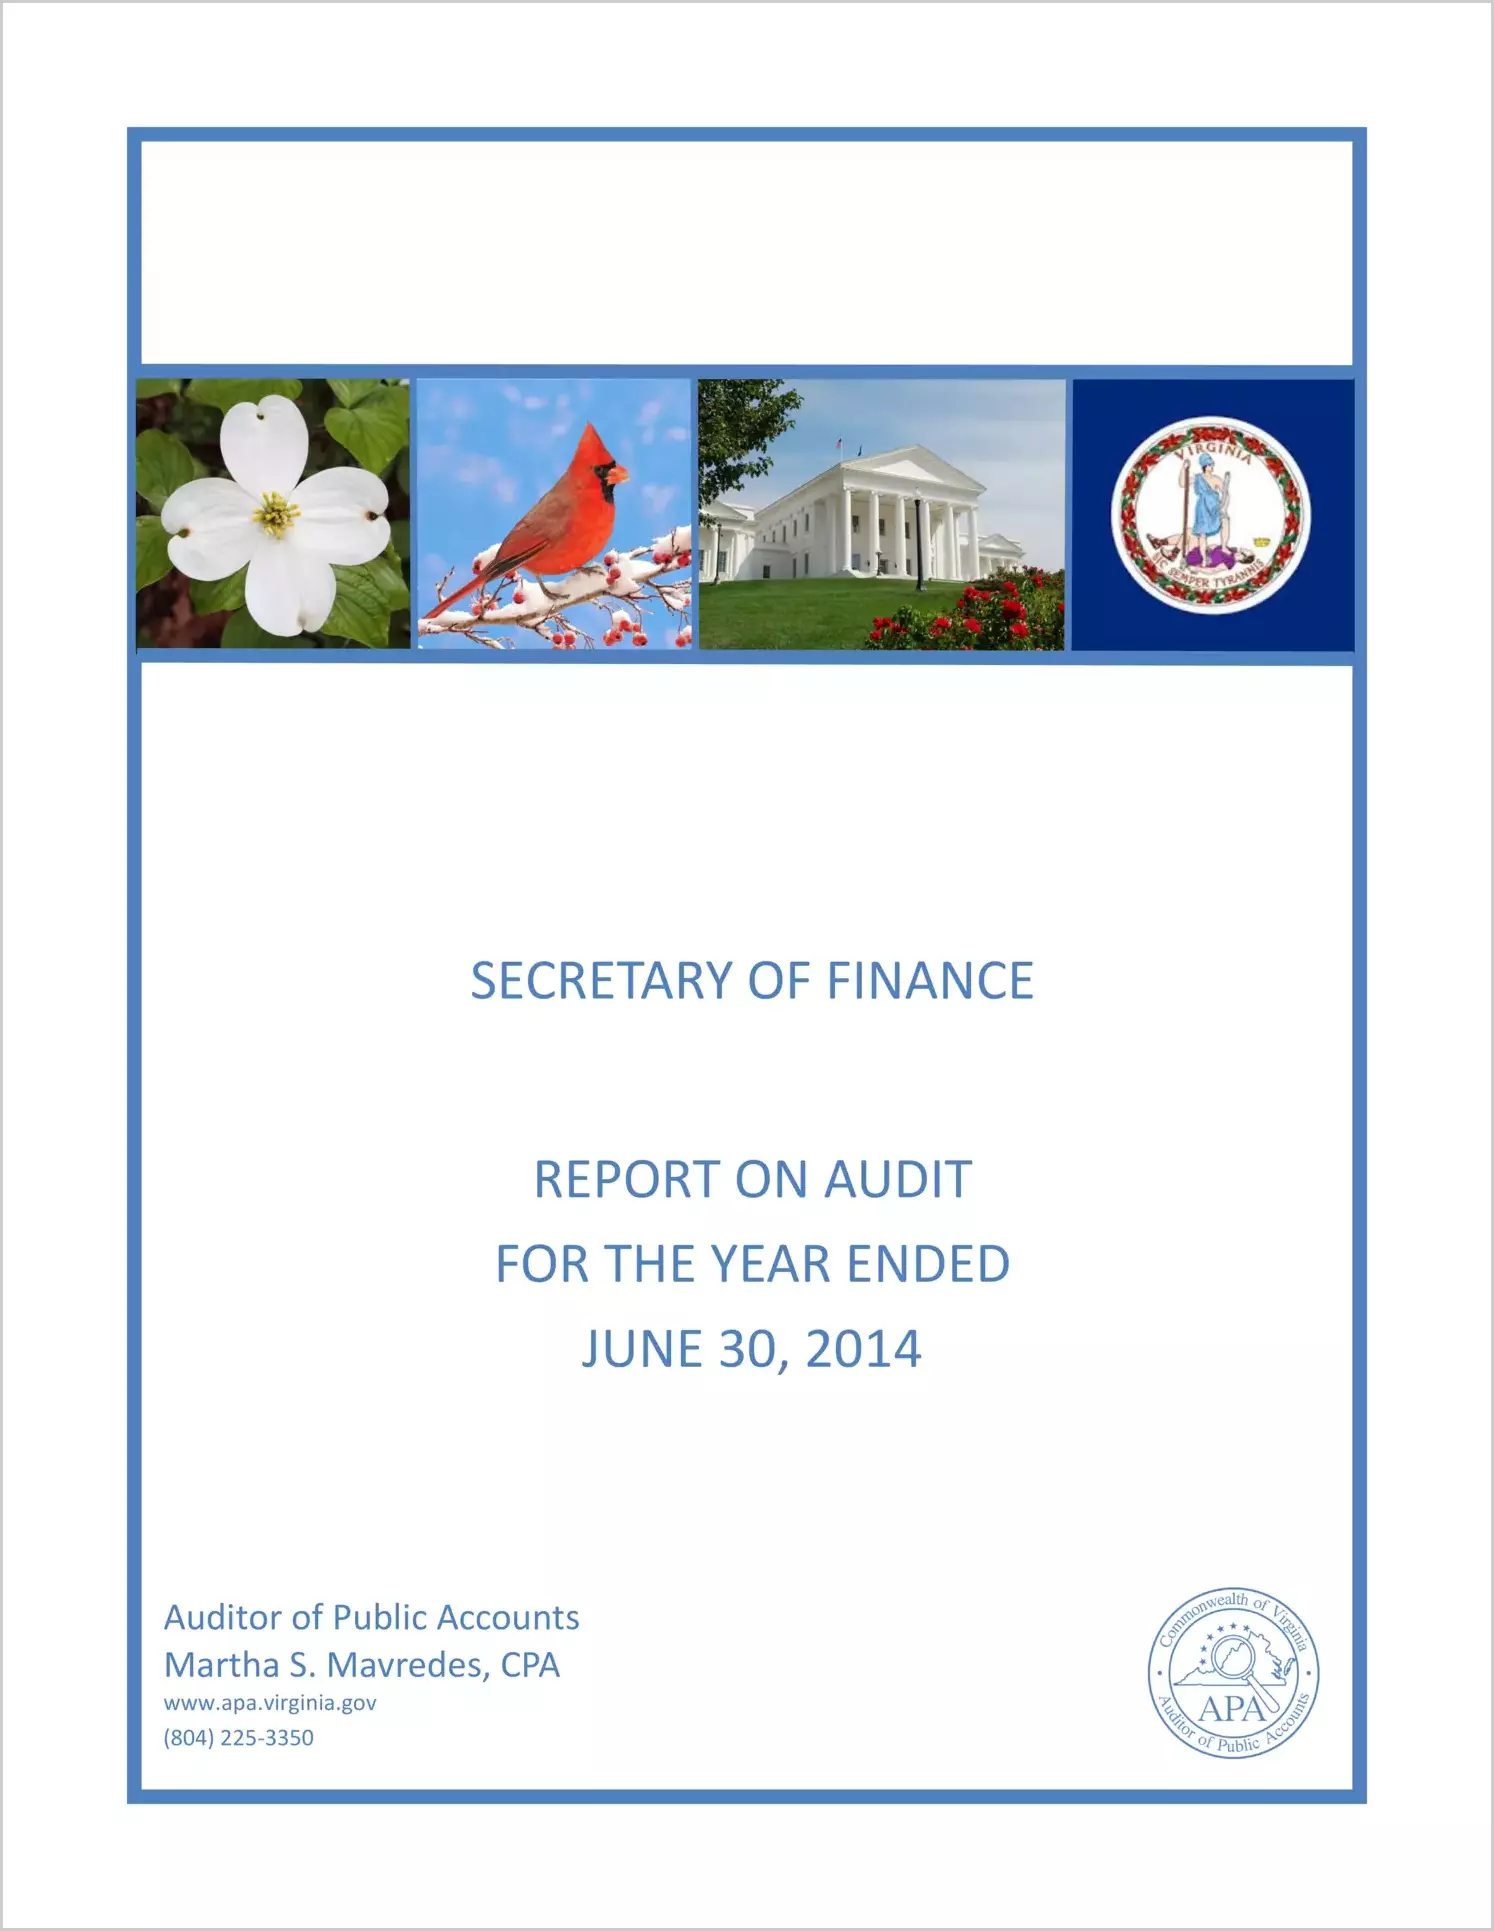 Secretary of Finance report on audit for the year ended June 30, 2014